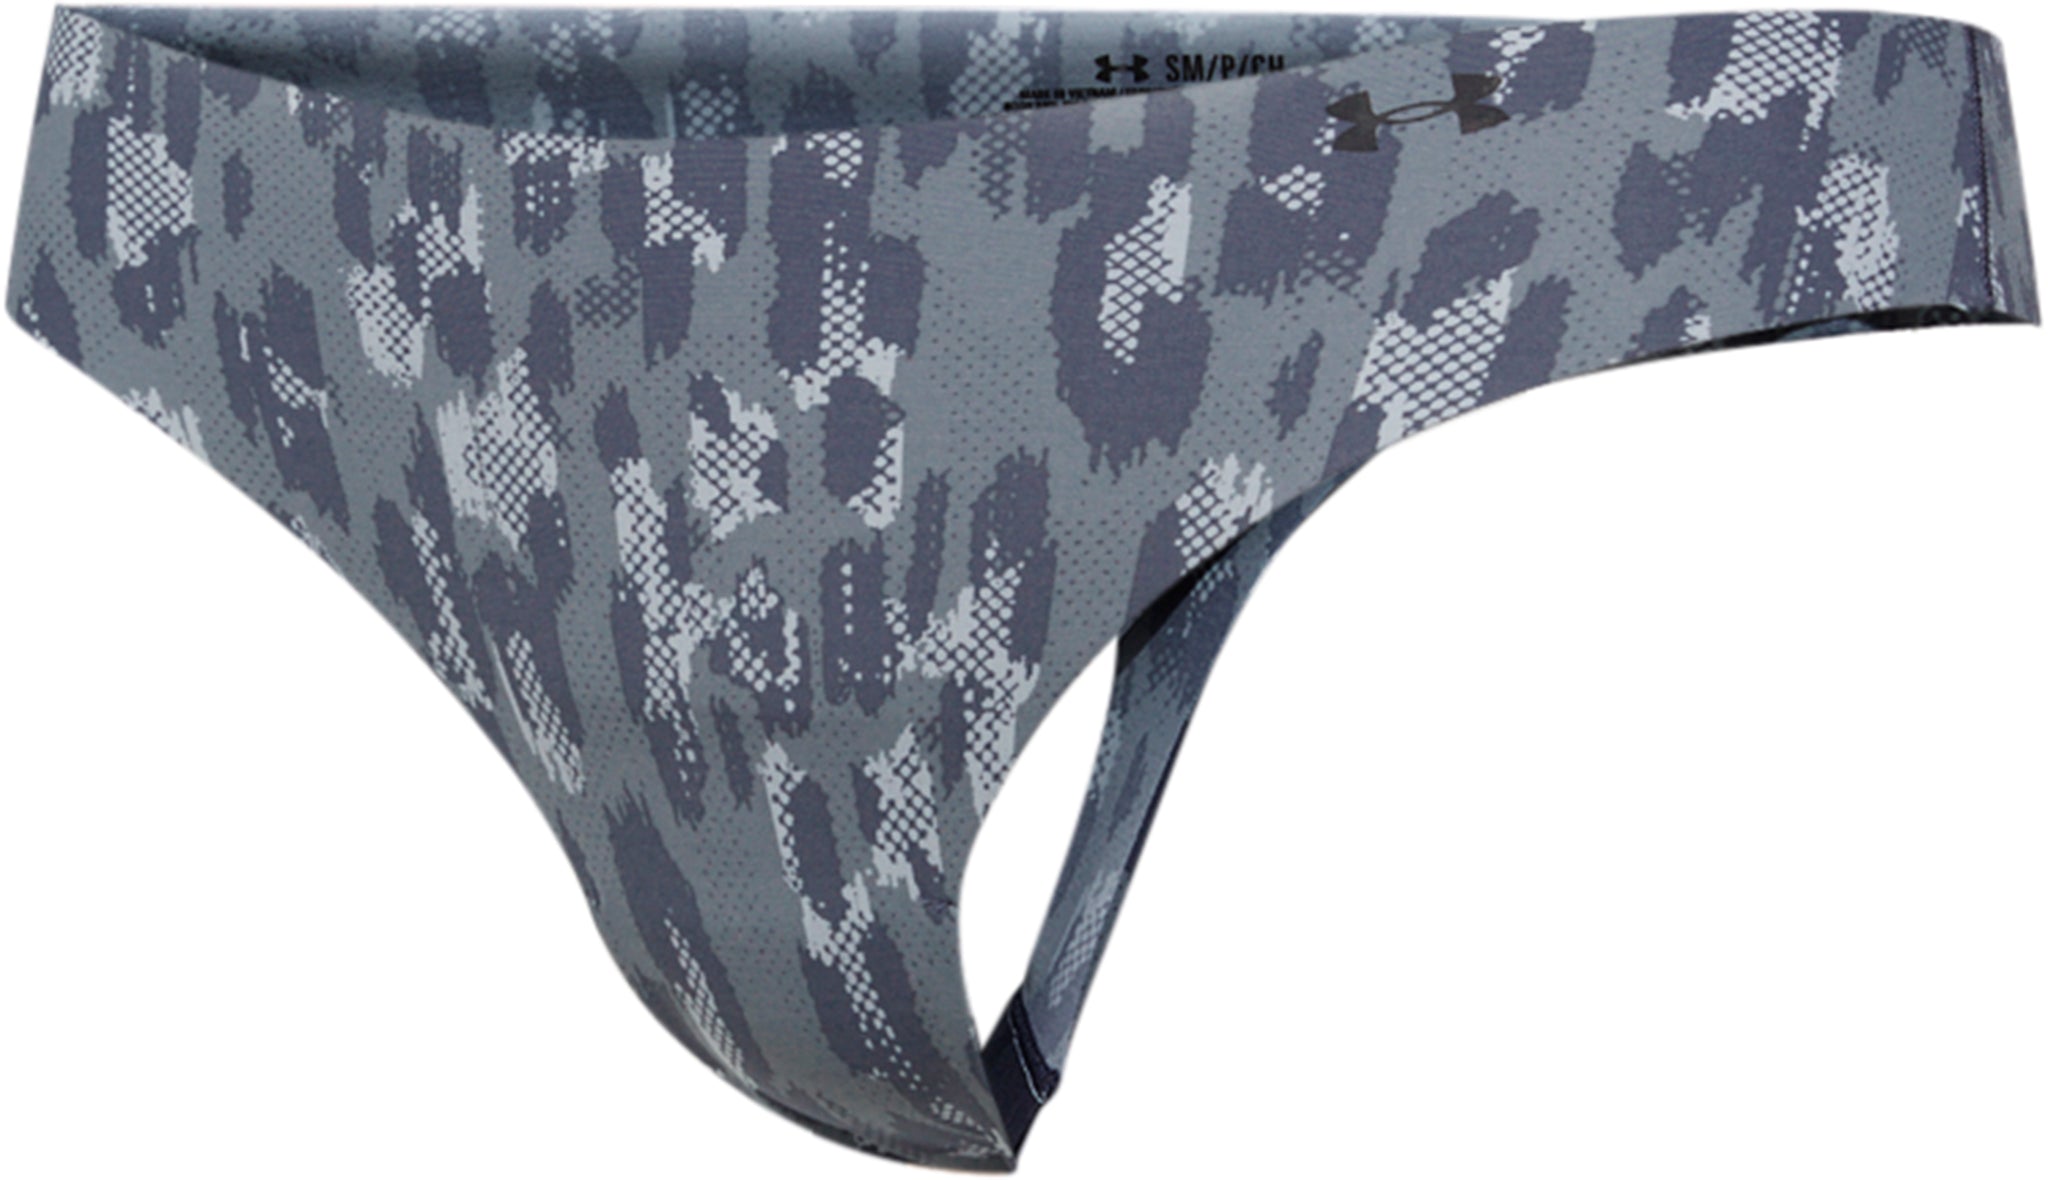  Under Armour Women's Pure Stretch Thong Multi-Pack, (044)  Downpour Gray/Harbor Blue/Harbor Blue, X-Small : Clothing, Shoes & Jewelry